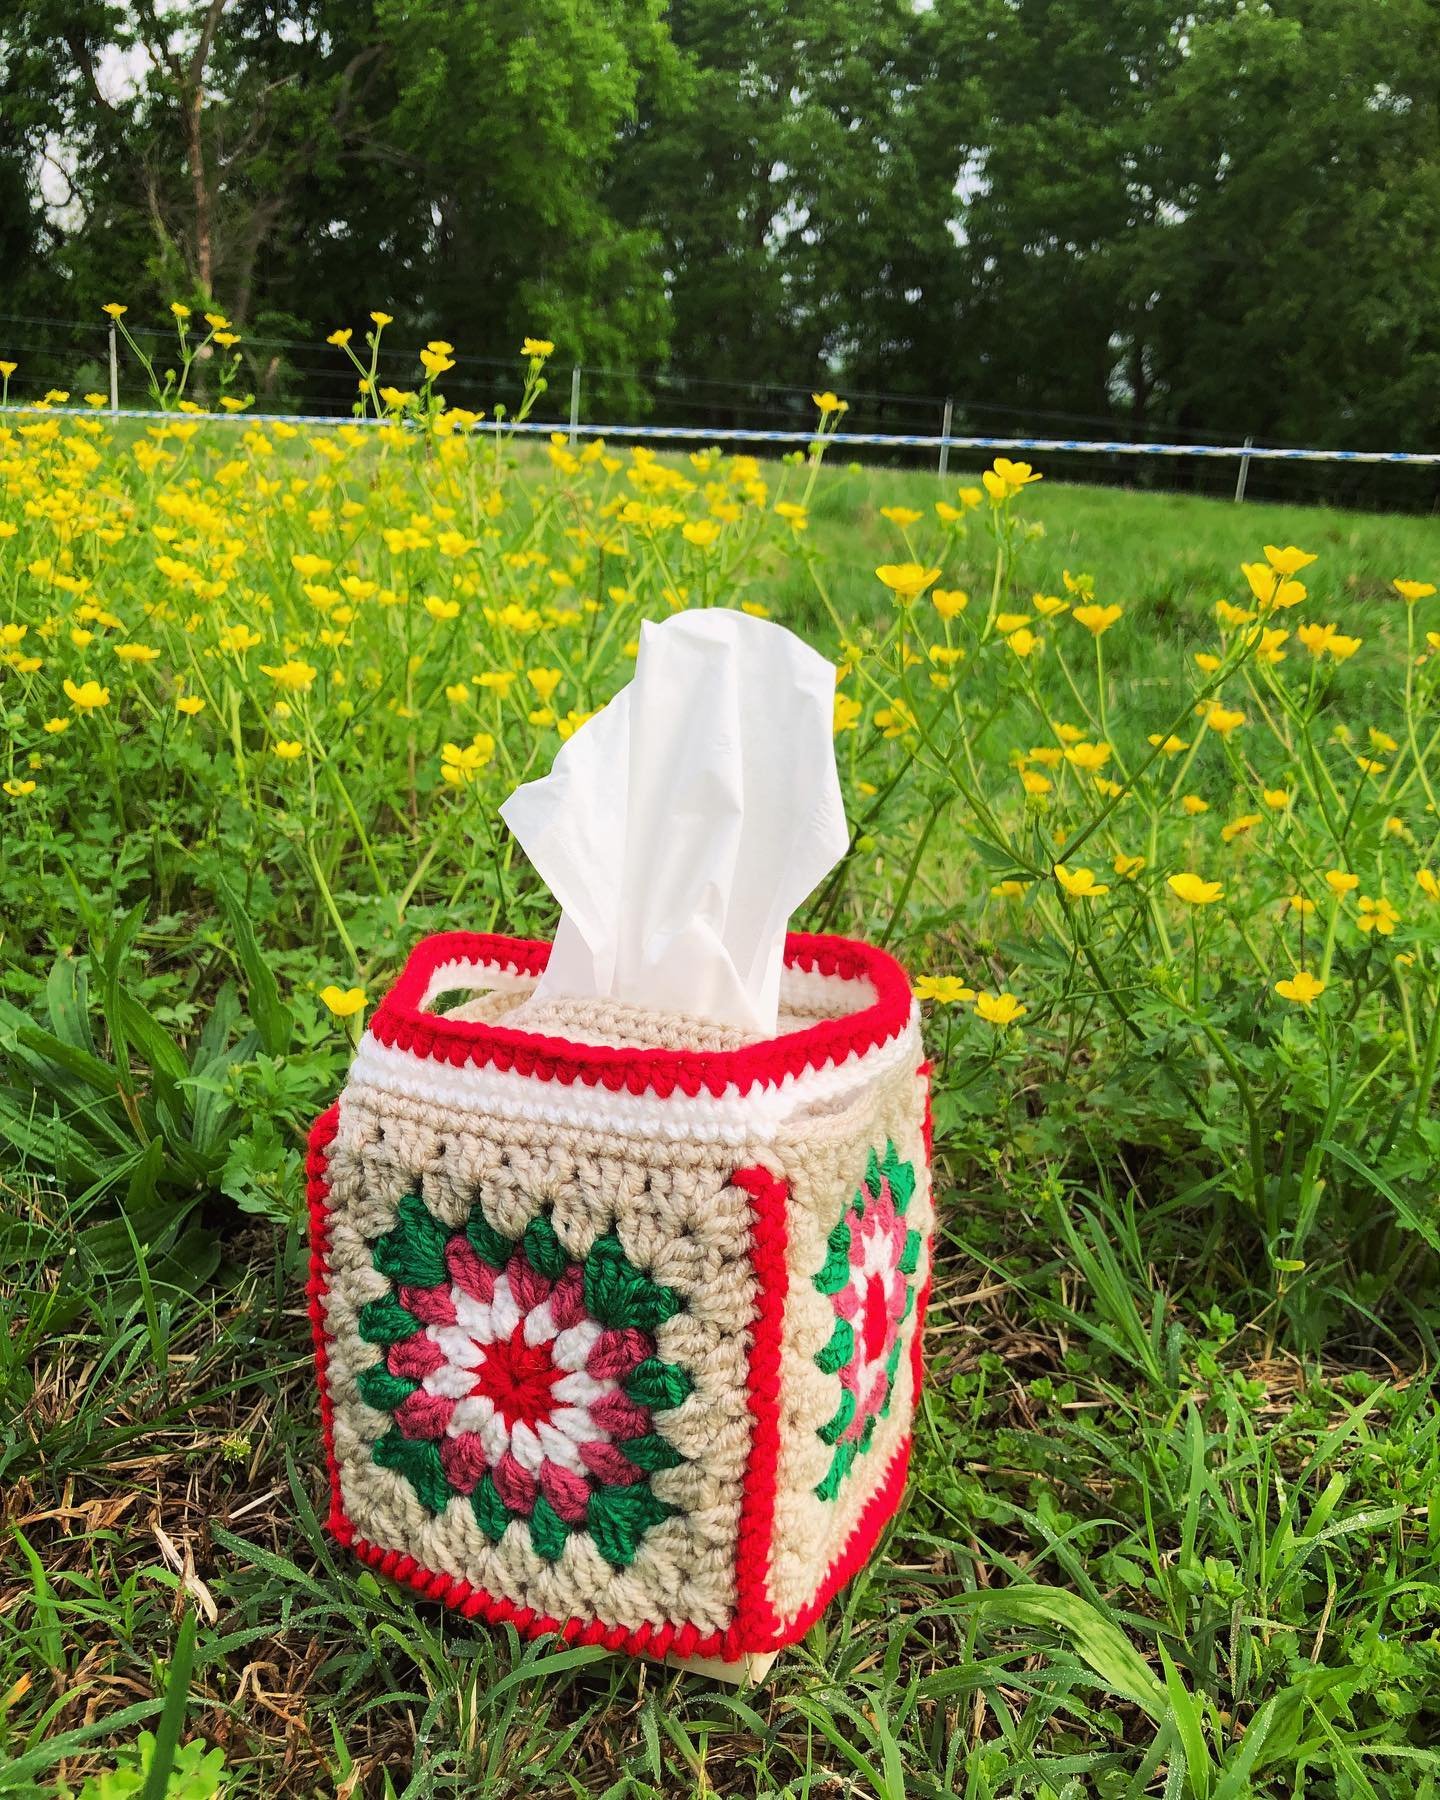 Granny squares as spotted in the wild. This marvelous specimen was custom designed by the talents of Vendor 413 @the_crochet_corner417. We were in need of a Kleenex box cover and, voila! It&rsquo;s perfect. #crochetersofinstagram #crochet #grannysqua